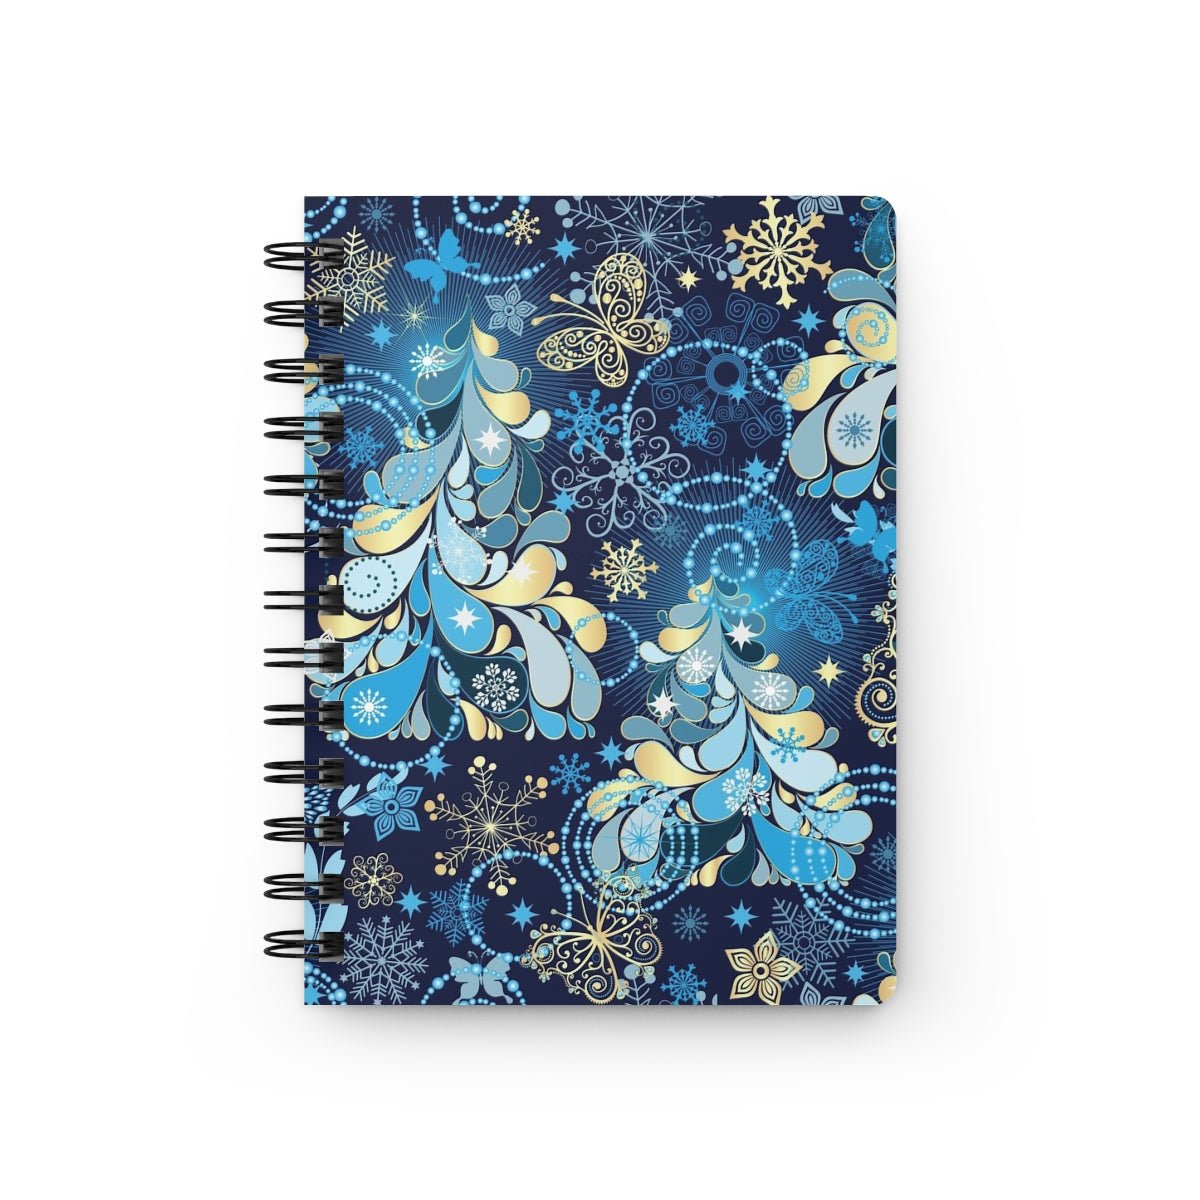 Magical Snowflakes Spiral Bound Journal - Puffin Lime